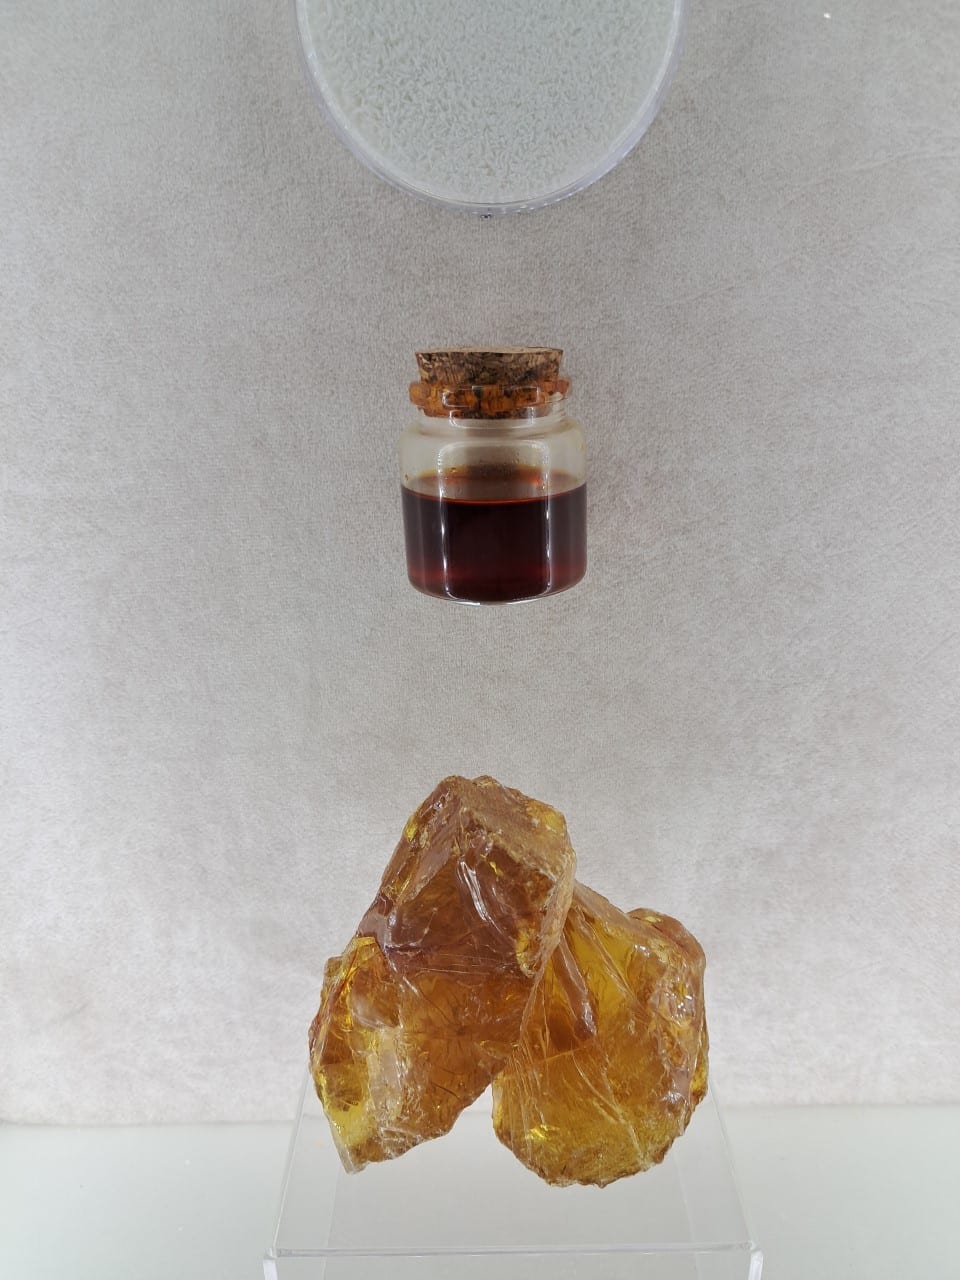 Moscow boasts of amber museum